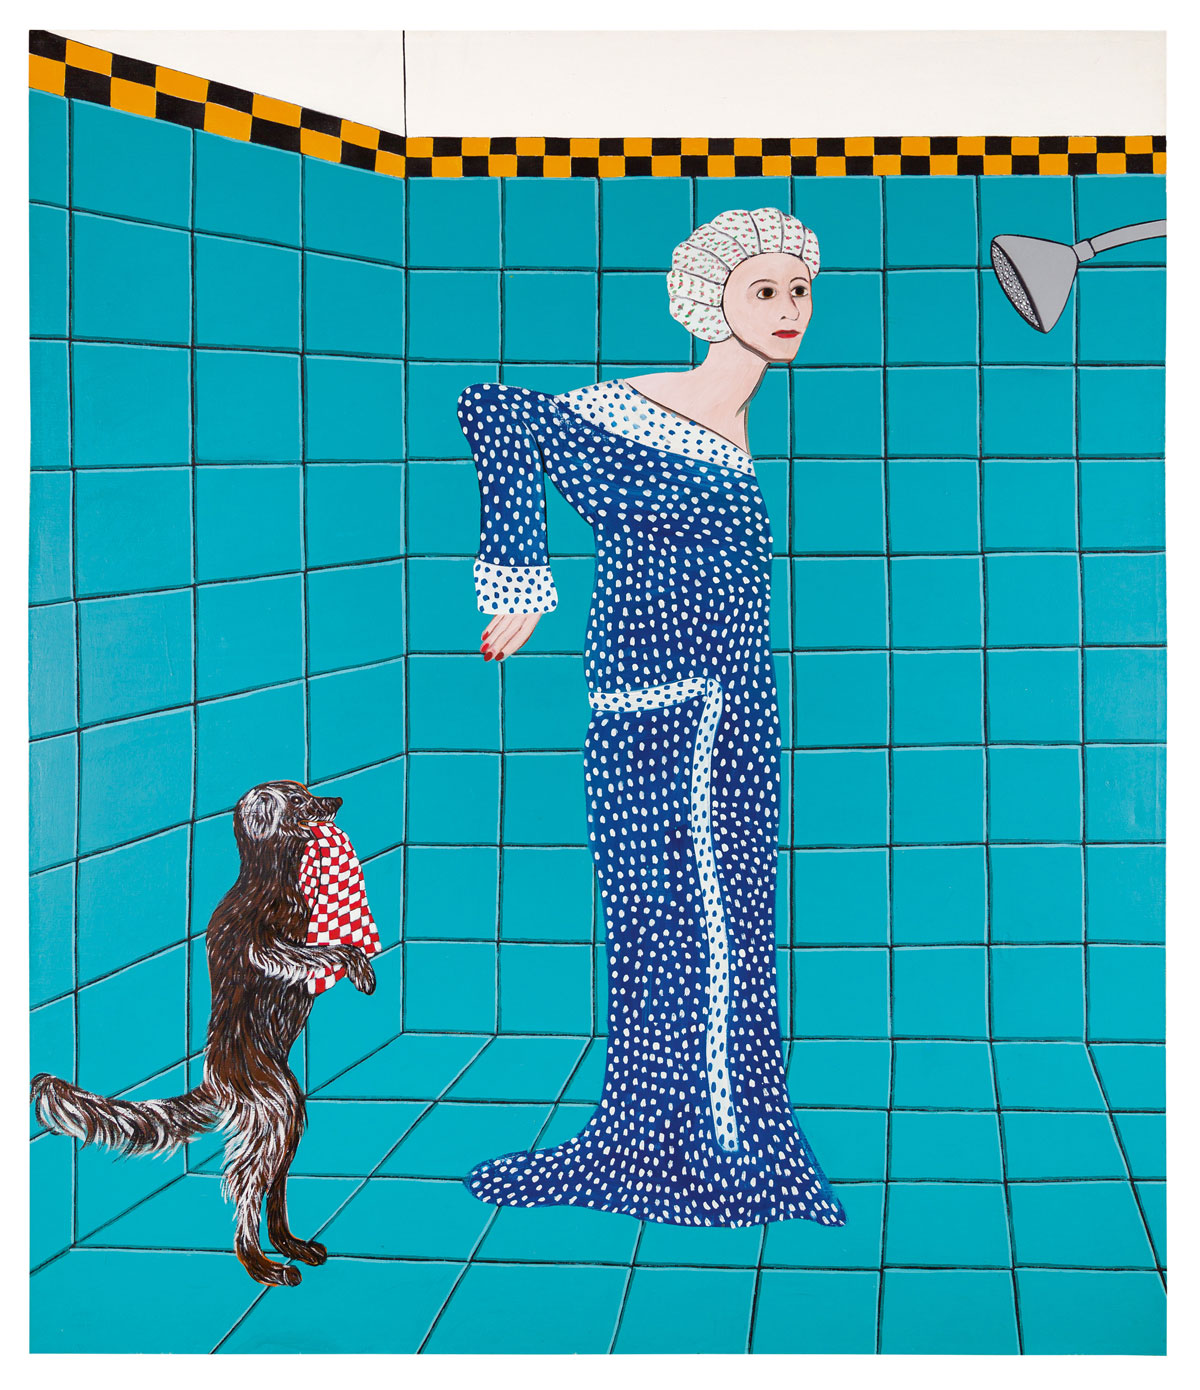 Painting of woman in robe in shower cap in turquoise tiled shower, dog stands behind her